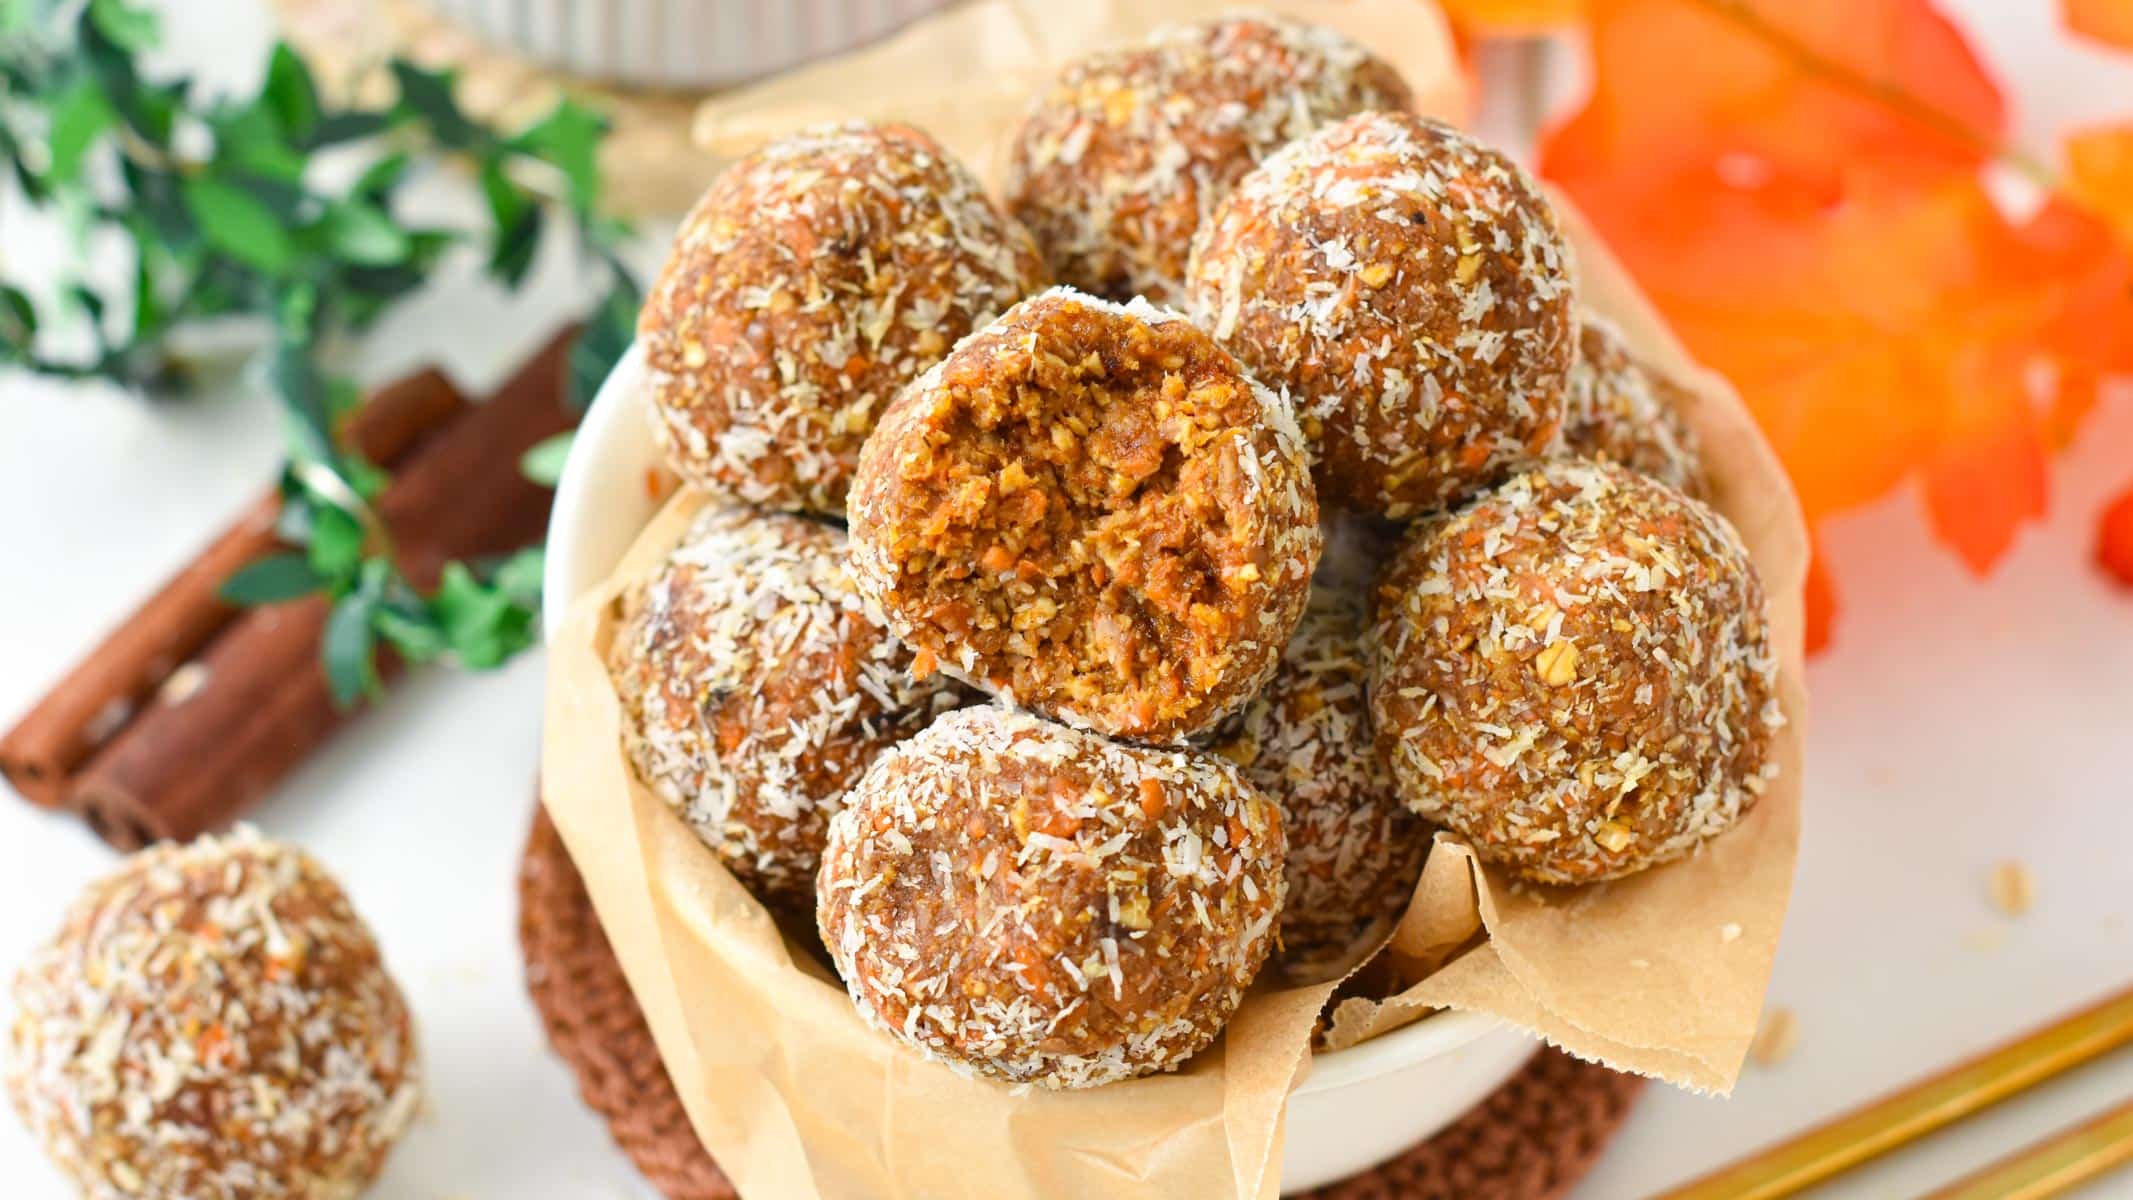 a ball filled with a stack of no-bake carrot cake energy bites made with dates, nuts, and carrots